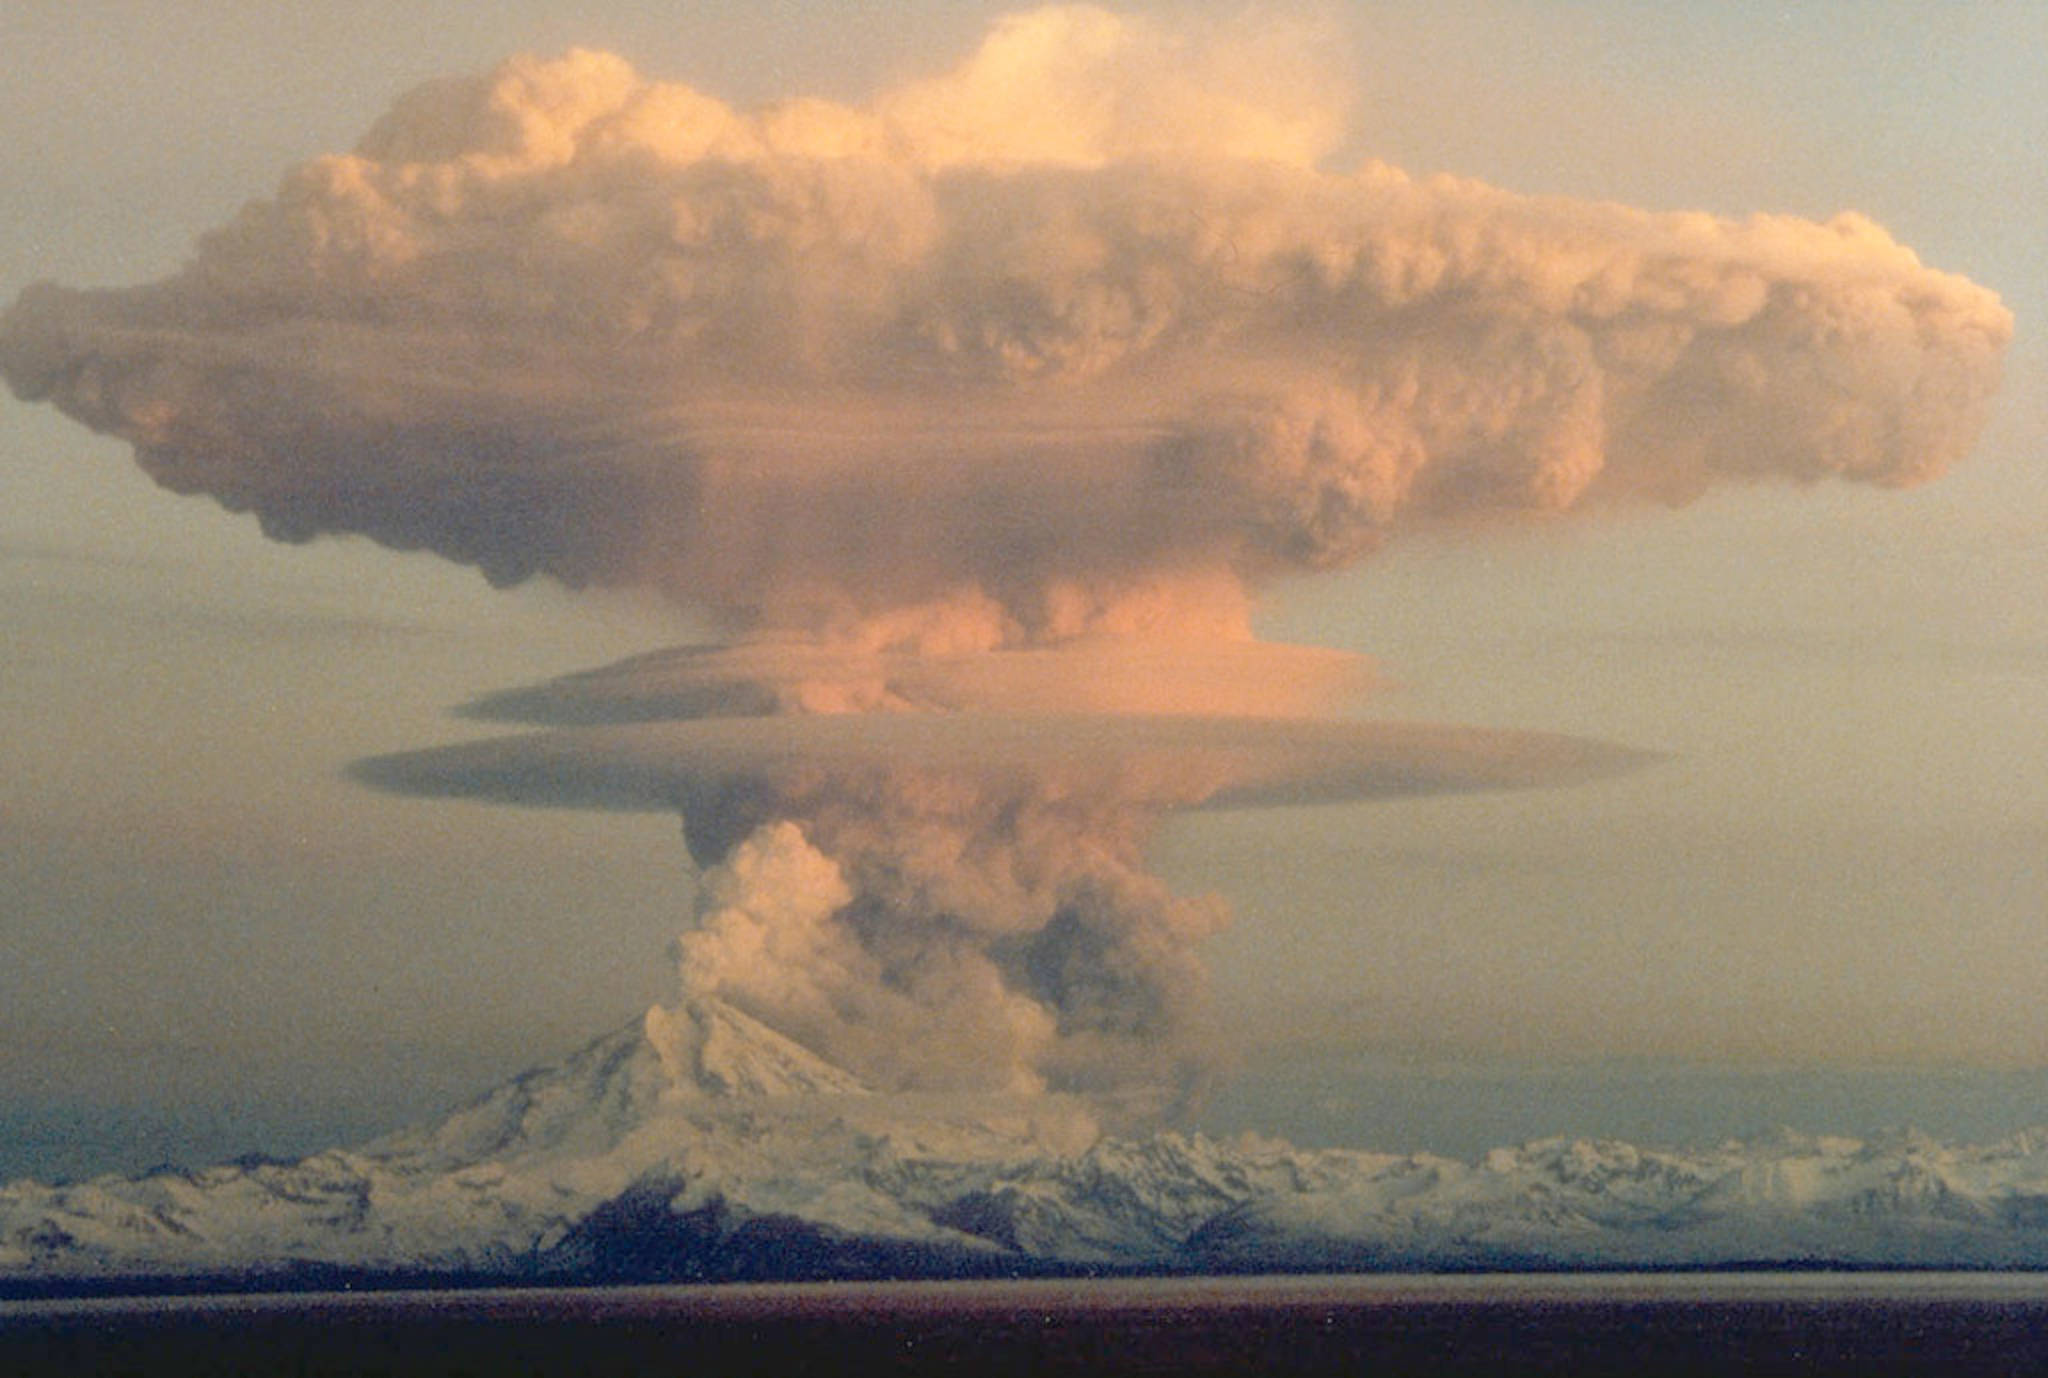 This April 21, 1990 image shows an ascending eruption cloud from Redoubt Volcano as viewed to the west from the Kenai Peninsula, Alaska. The mushroom-shaped plume rose from avalanches of hot debris that cascaded down the north flank of the volcano. A smaller, white steam plume rises from the summit crater. (Image courtesy Robert Clucas and the U.S. Geological Survey)